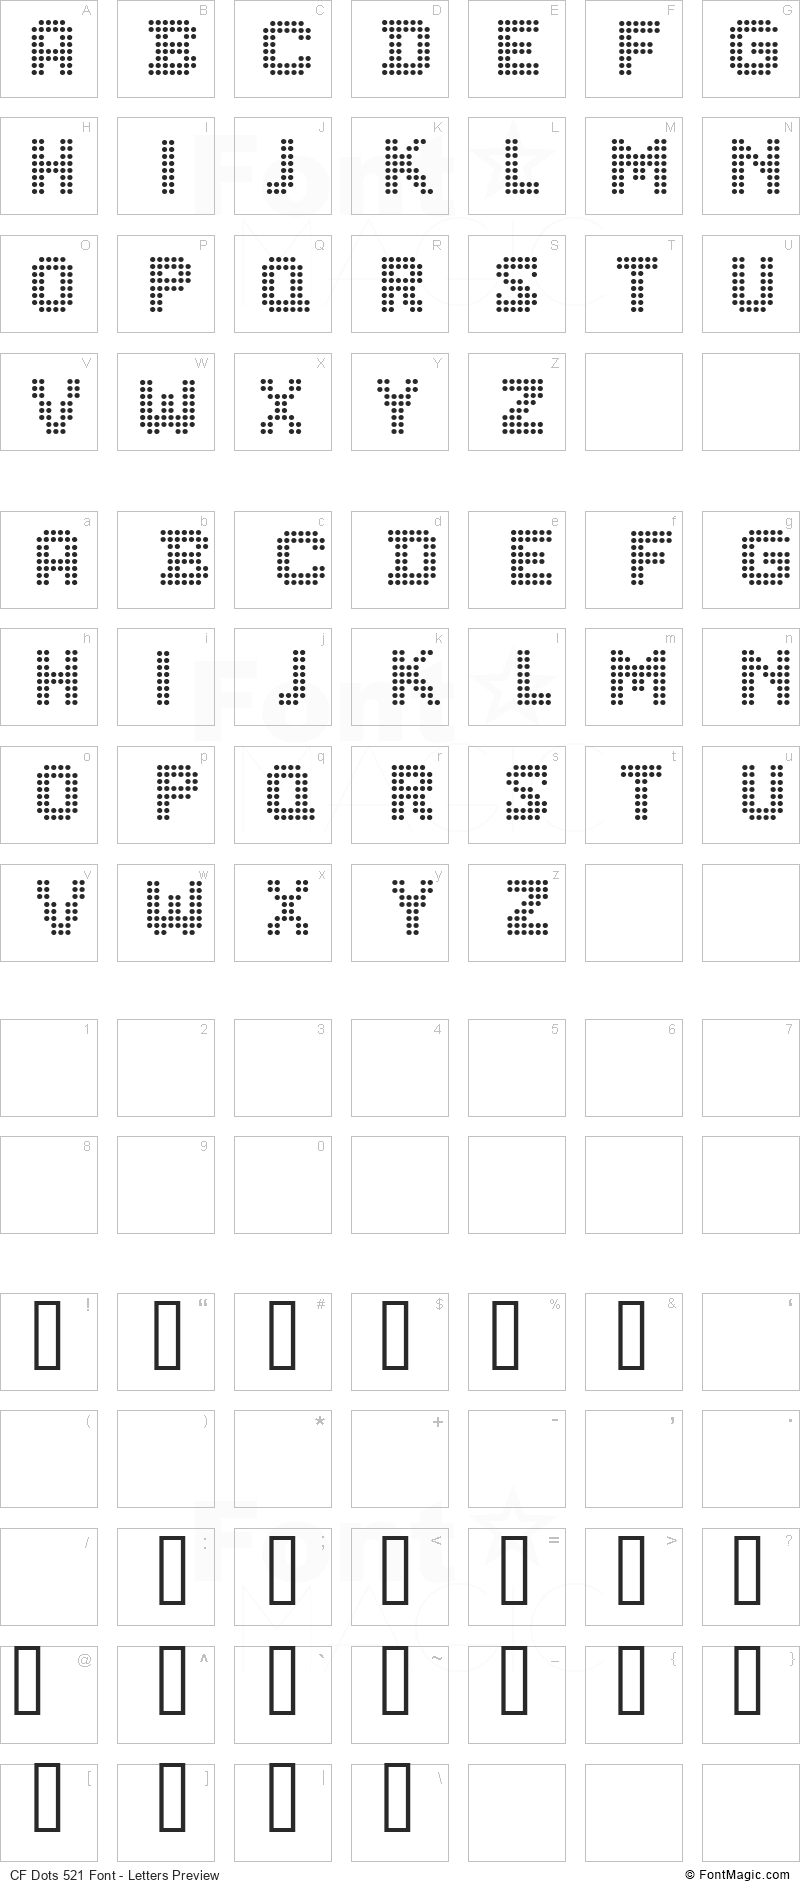 CF Dots 521 Font - All Latters Preview Chart